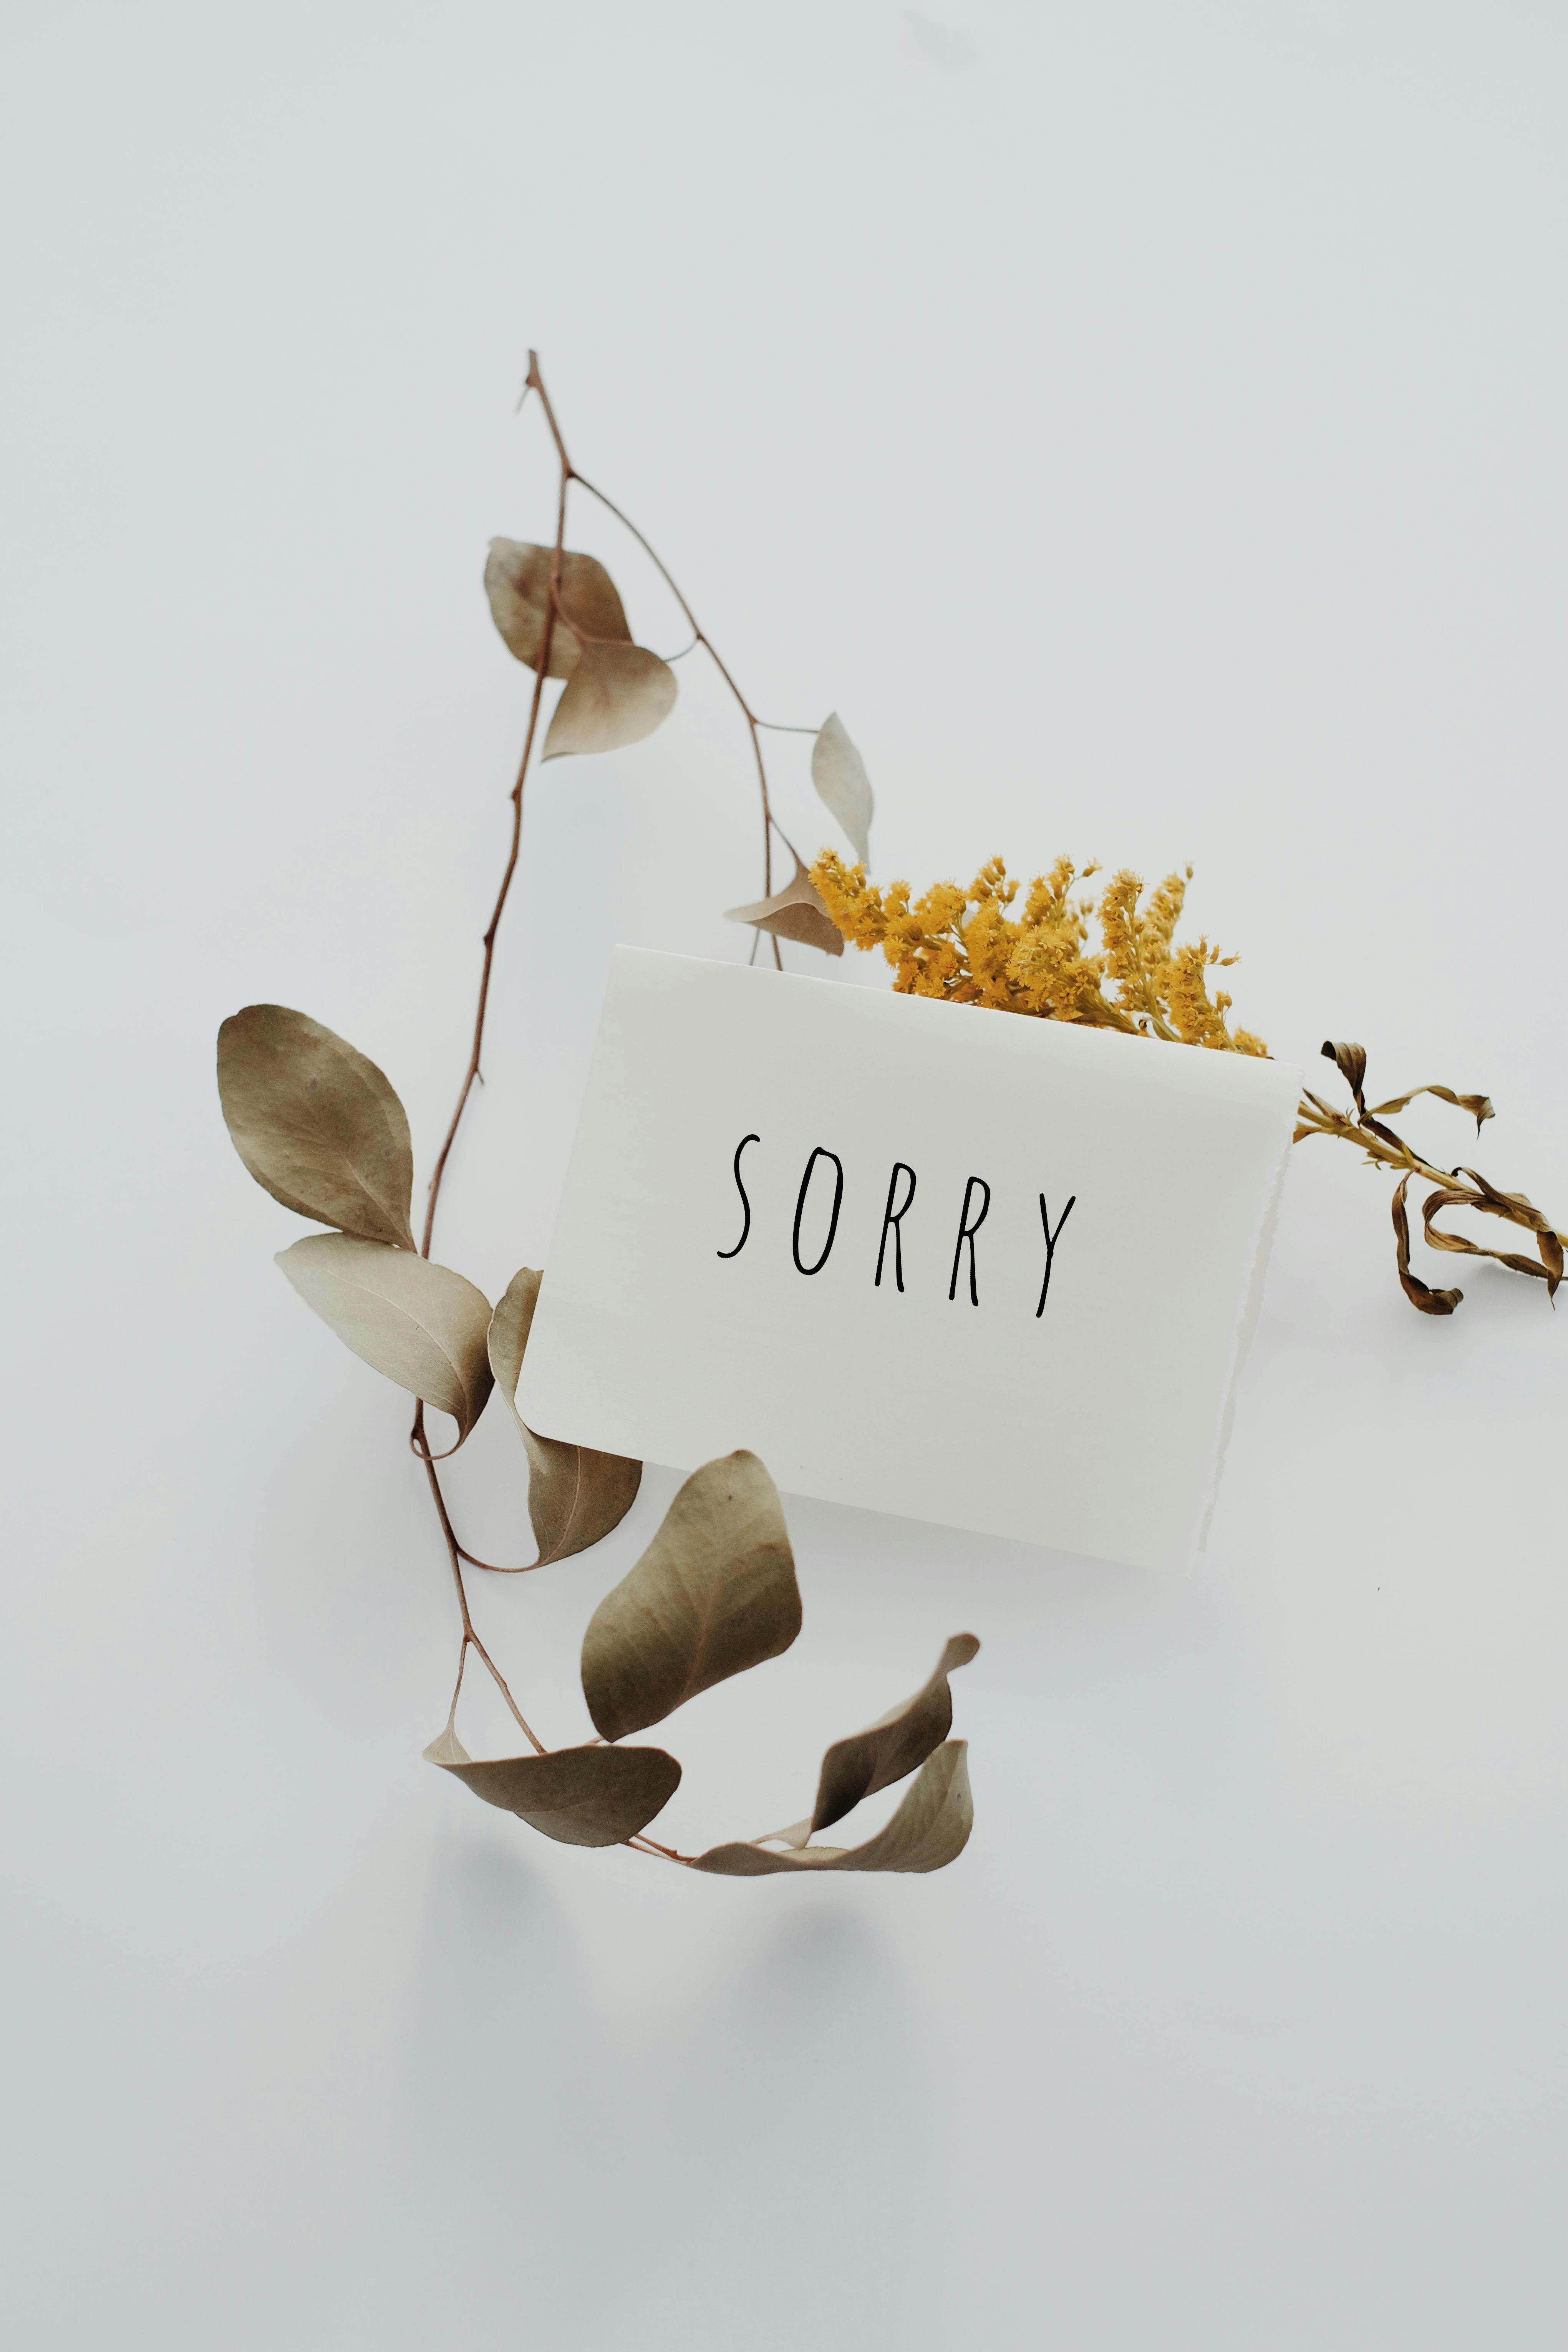 A sorry letter | Source: Pexels